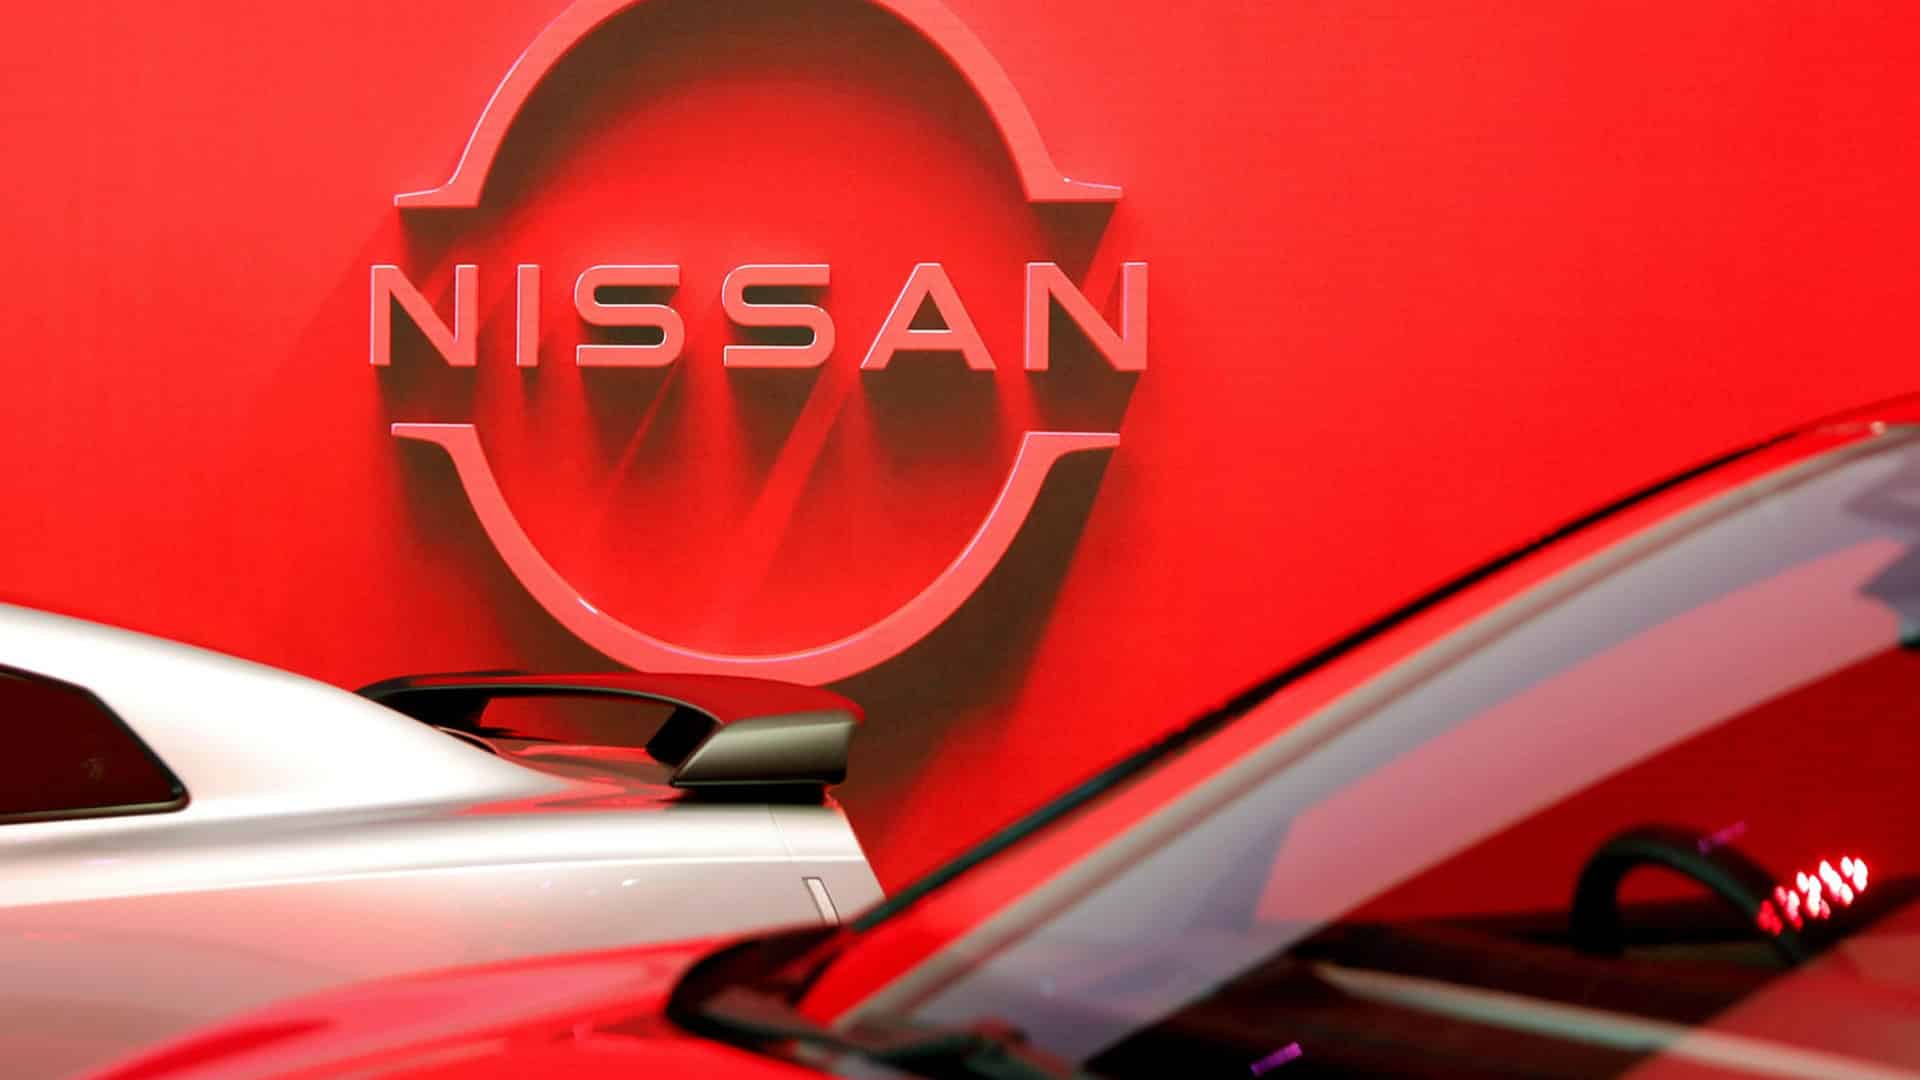 Nissan forms cross-functional 'semiconductor task force' to address chip shortage issue